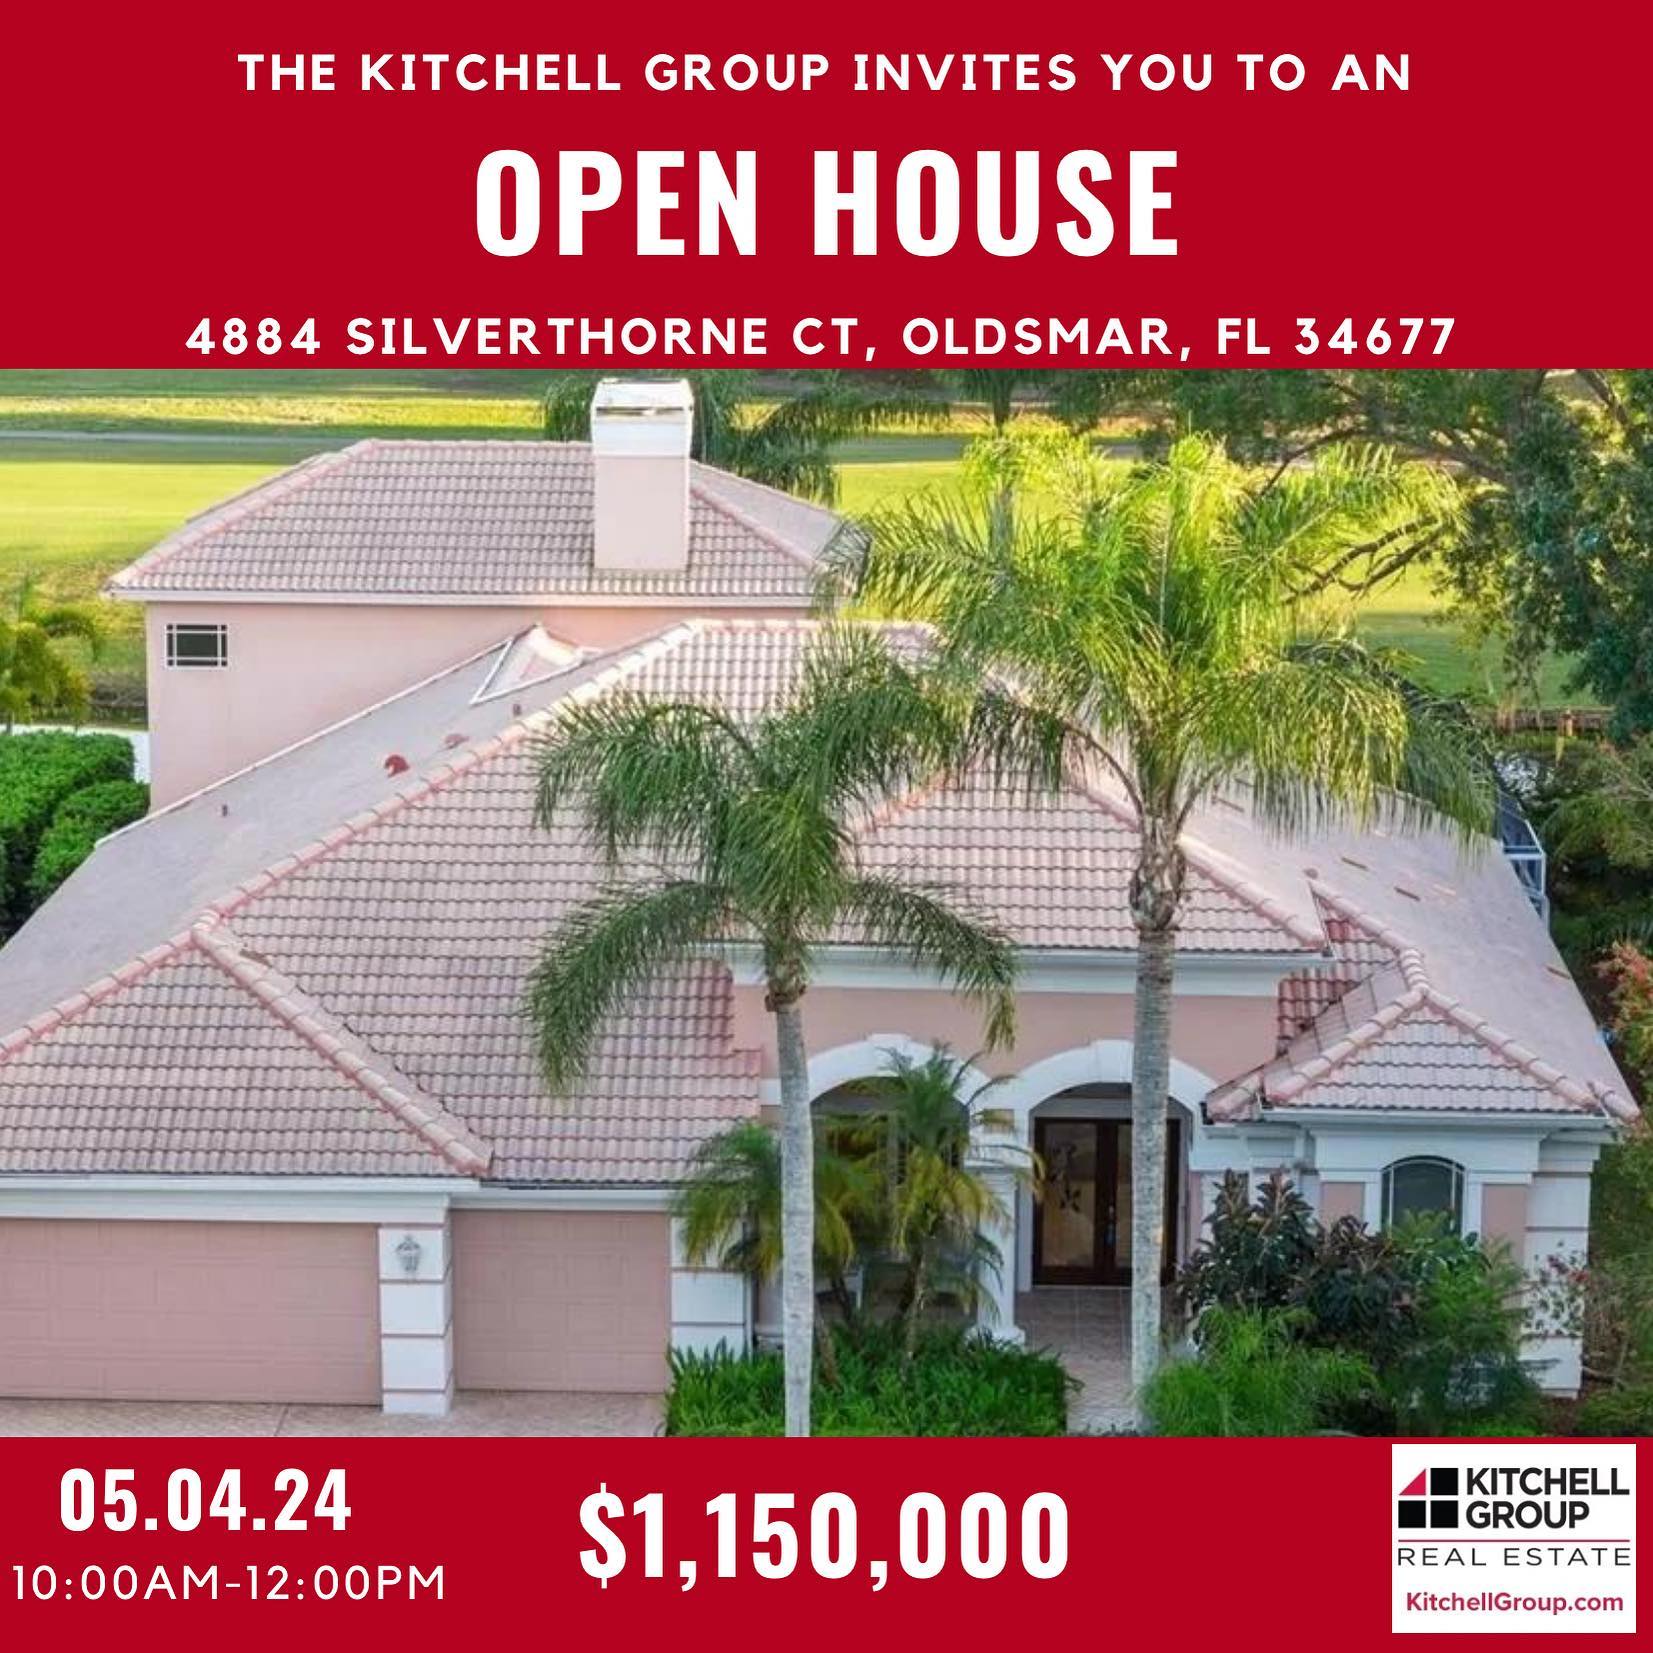 NEW LISTING IN TAMPA! 🏡 Looking to make the move...